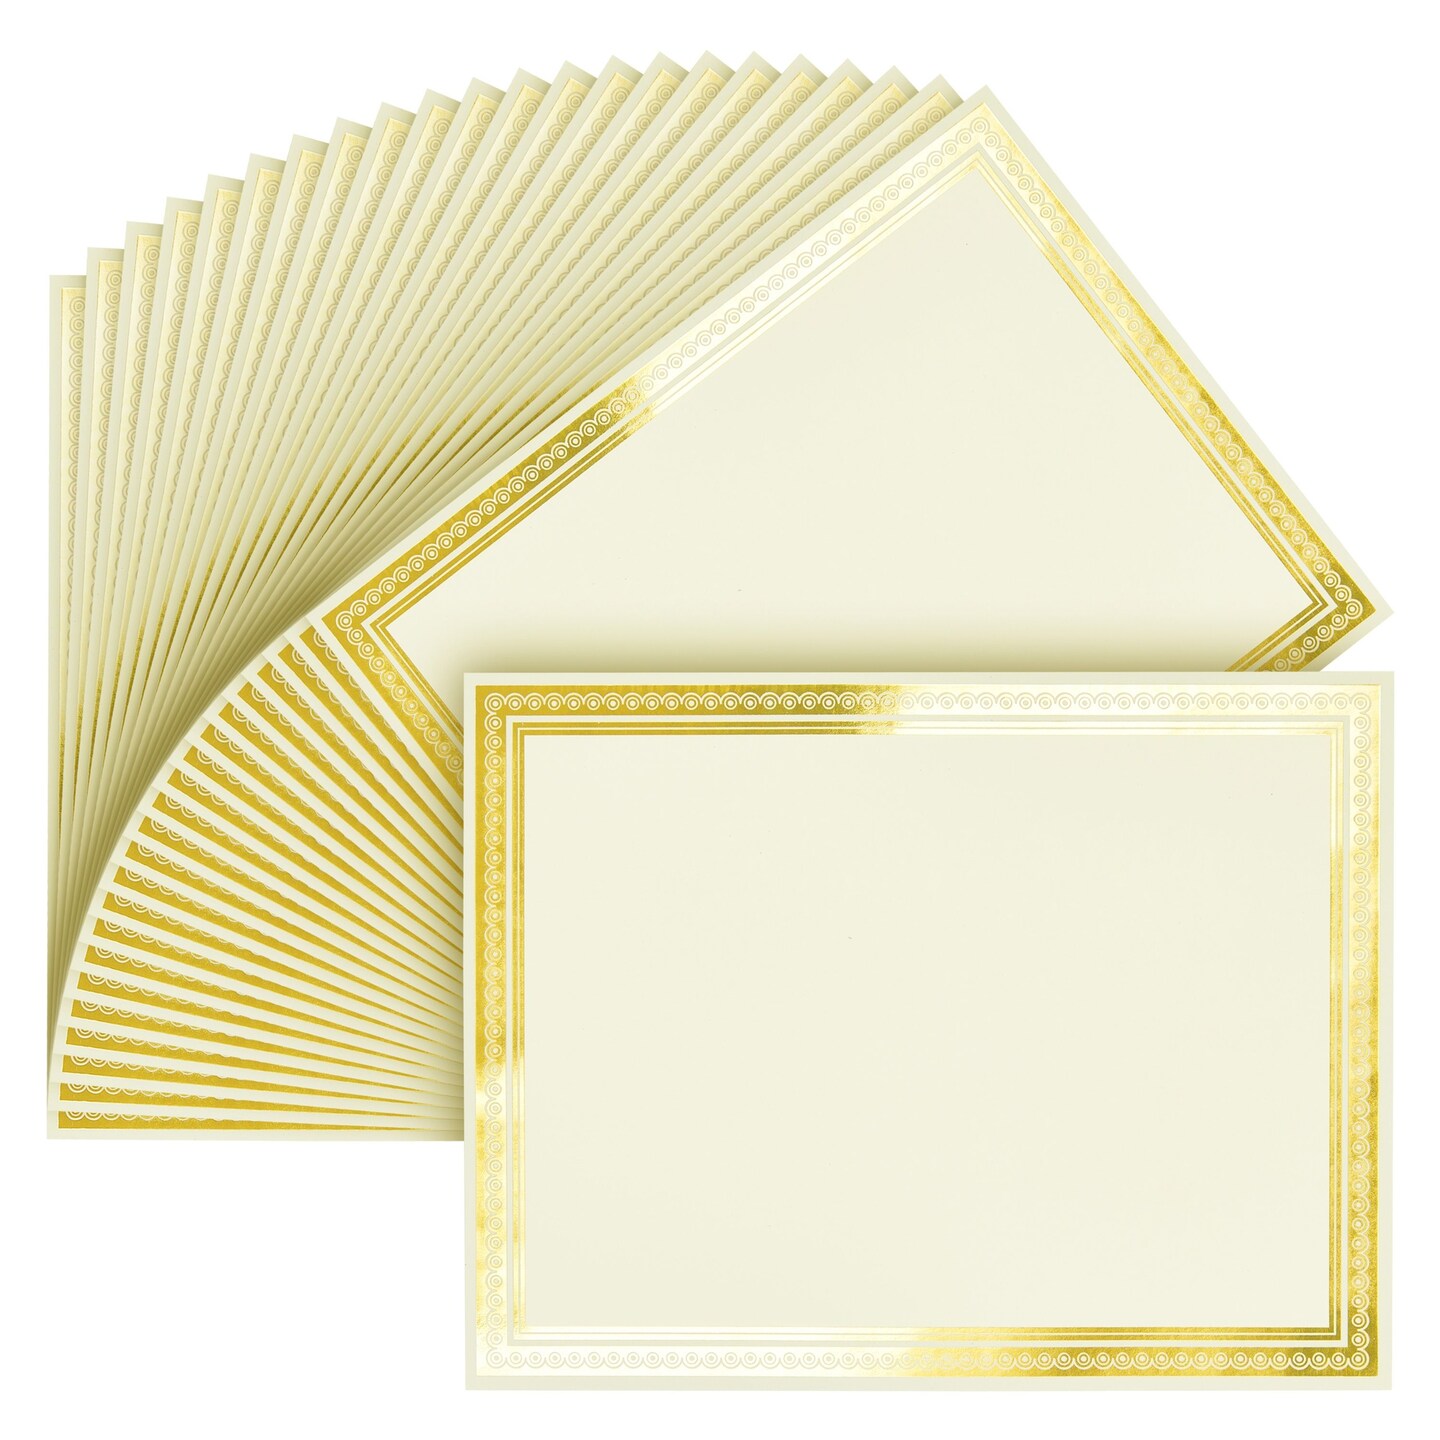 Paper Master Award Certificate Paper, 50 Count Gold Foil Blank Certificate Paper Sheets, Laser and Inkjet Printer Friendly,8.5 x 11 Inches